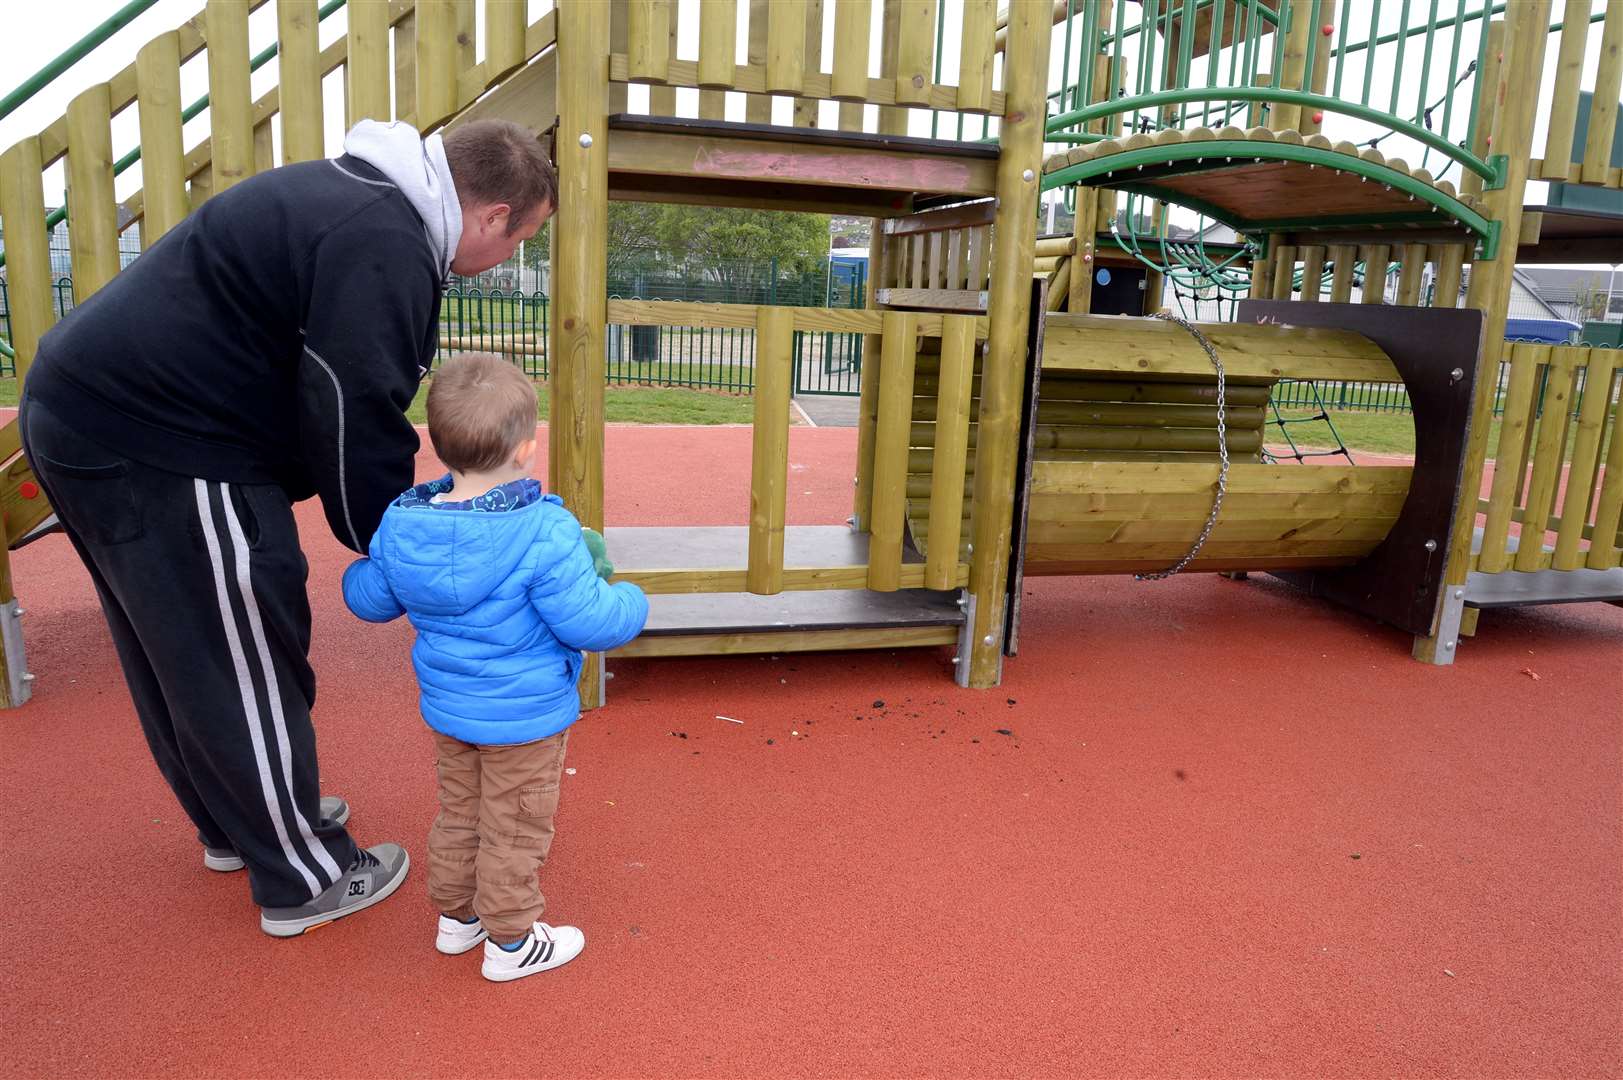 Michael Catterson with his son looking at the damaged park.